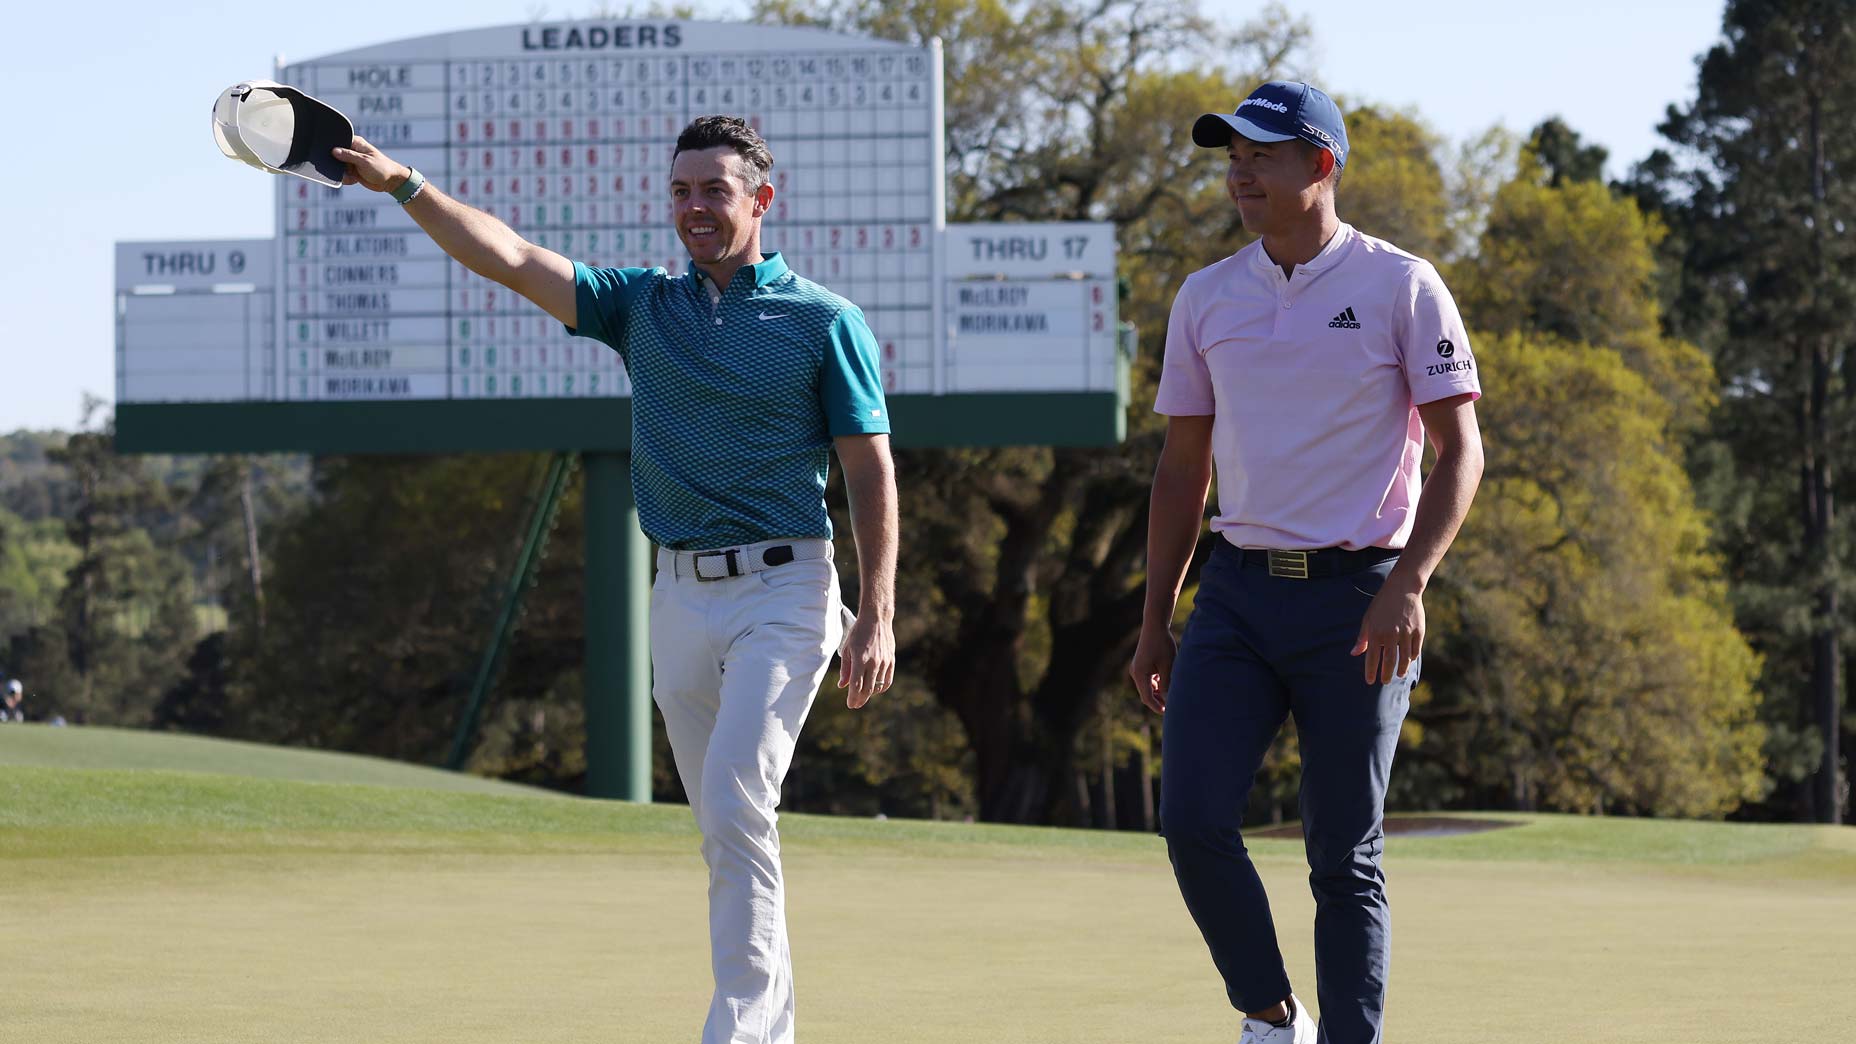 Nine Texans are among the 88-player field at the Masters